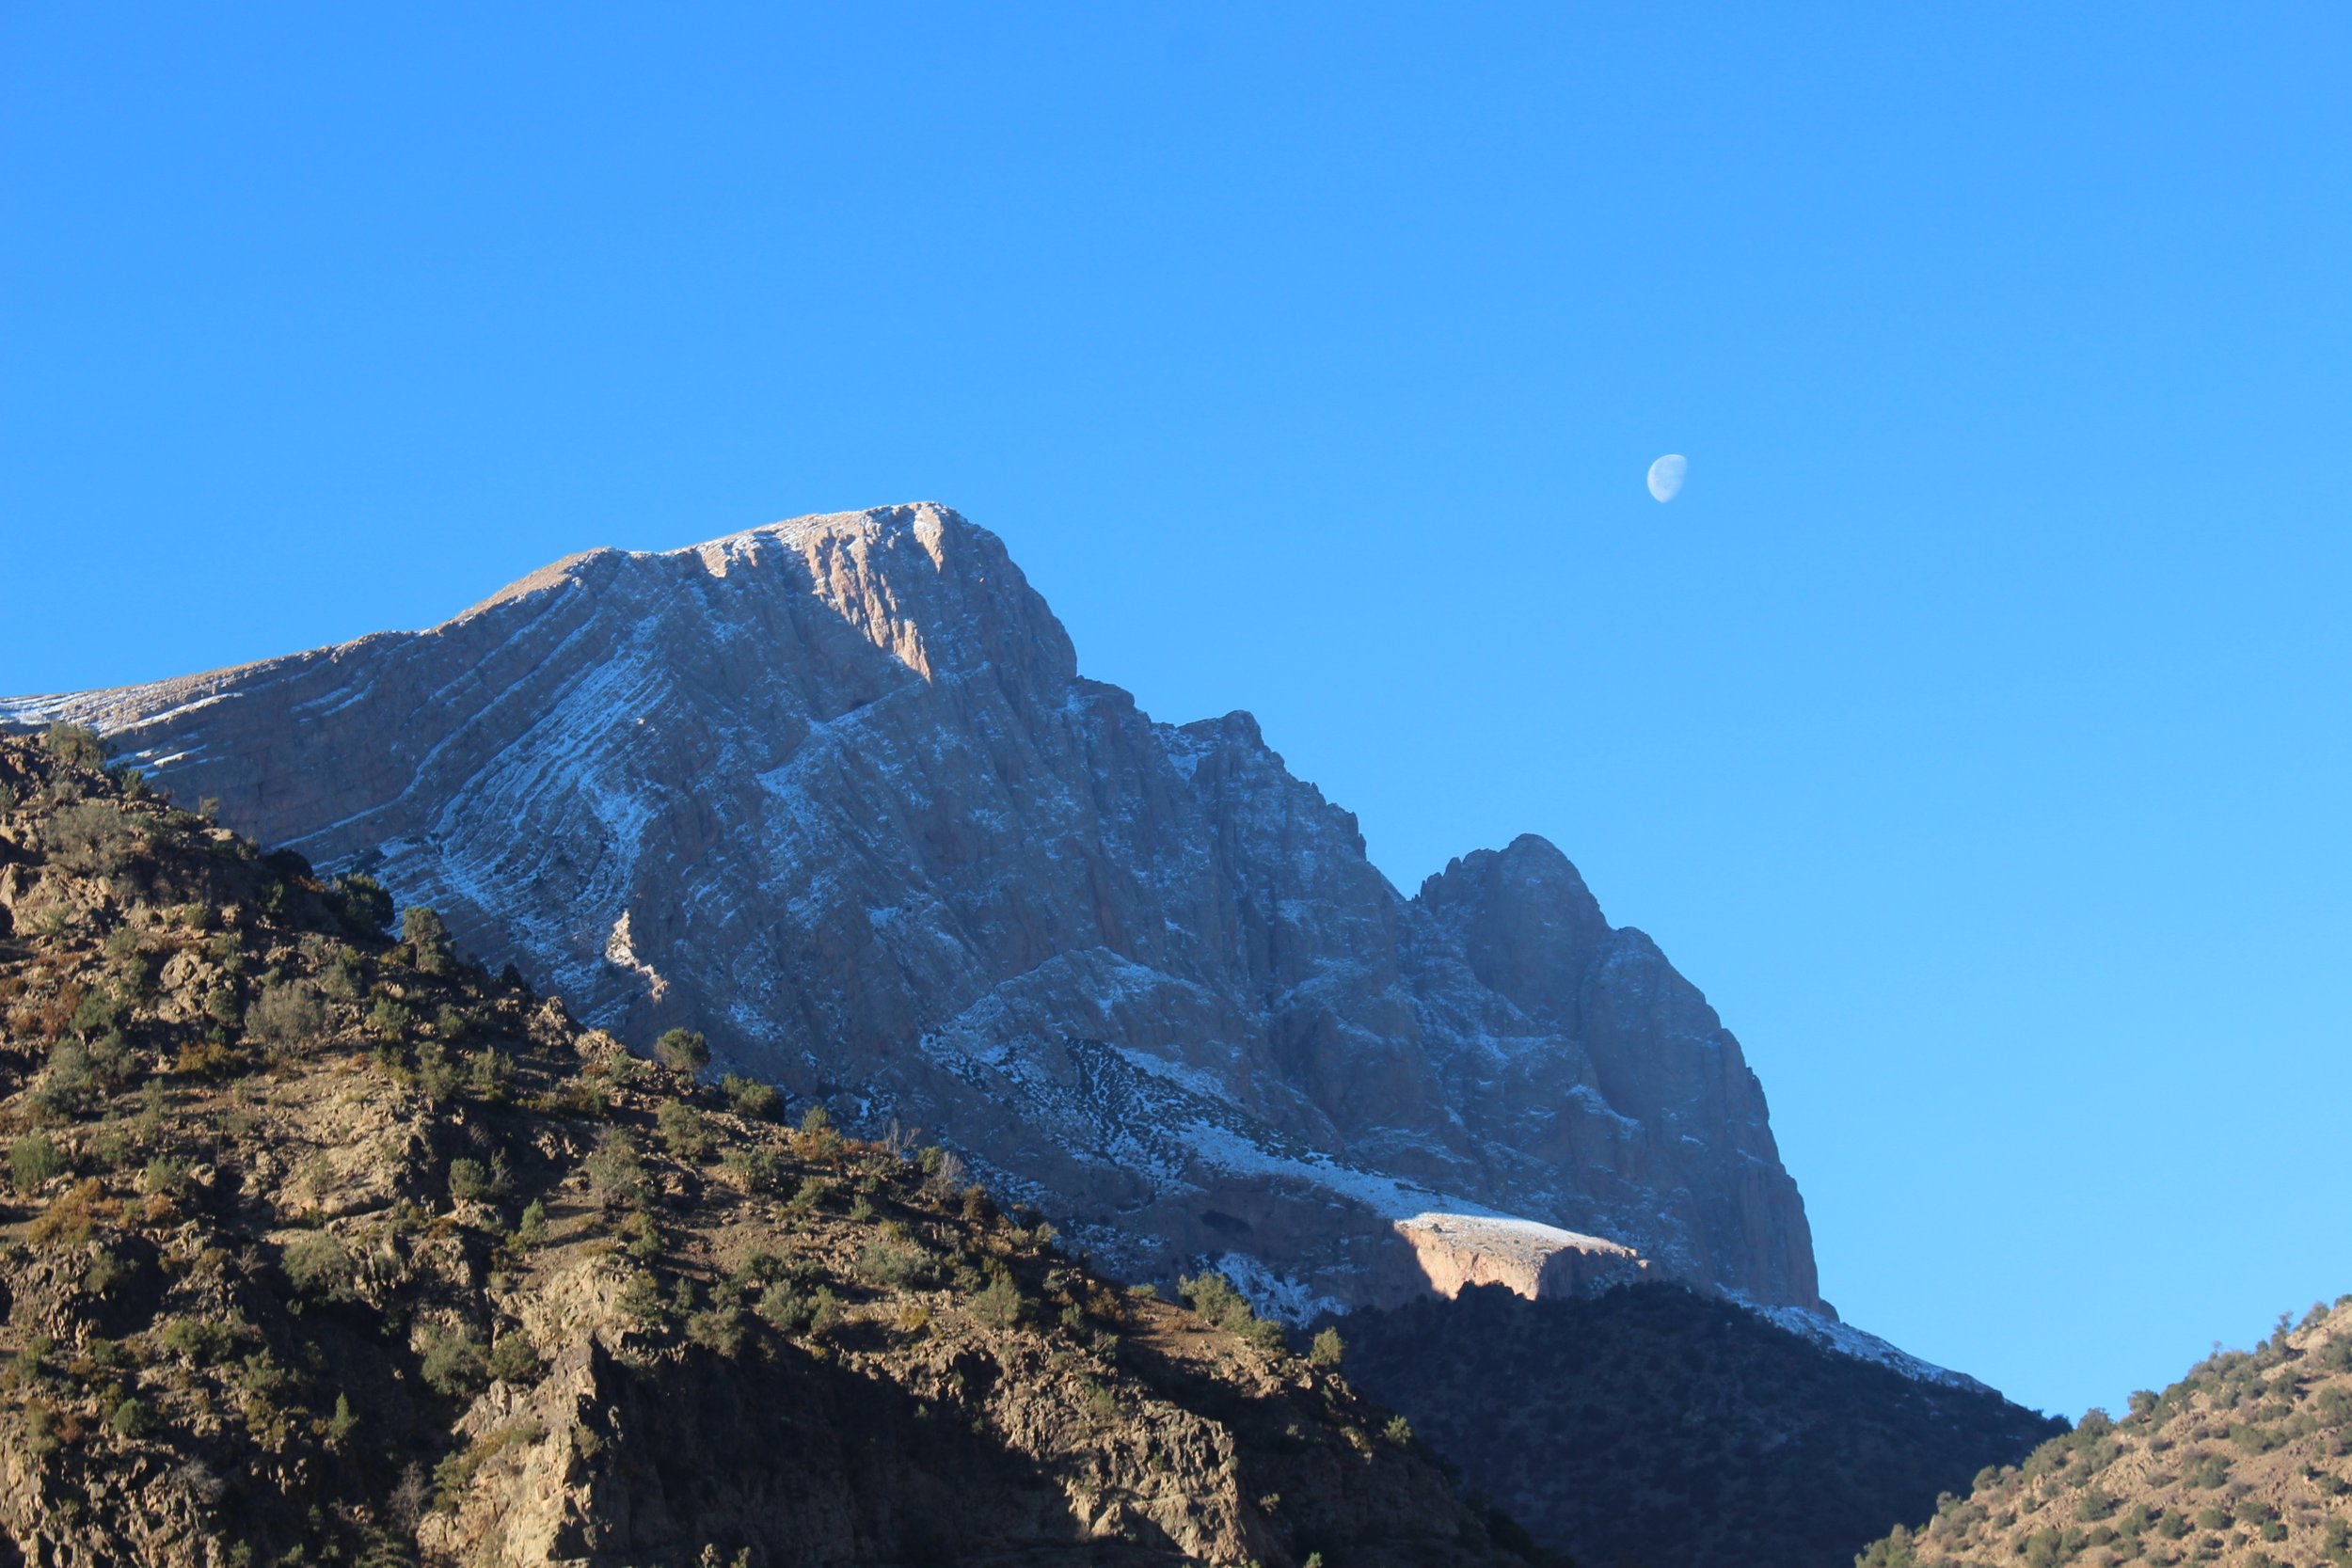   Although it was cold standing outside, in the mornings you can catch a warm view of the mountains with the moon joining in on the photo.  Photo credit: Baldwin, 2023. 